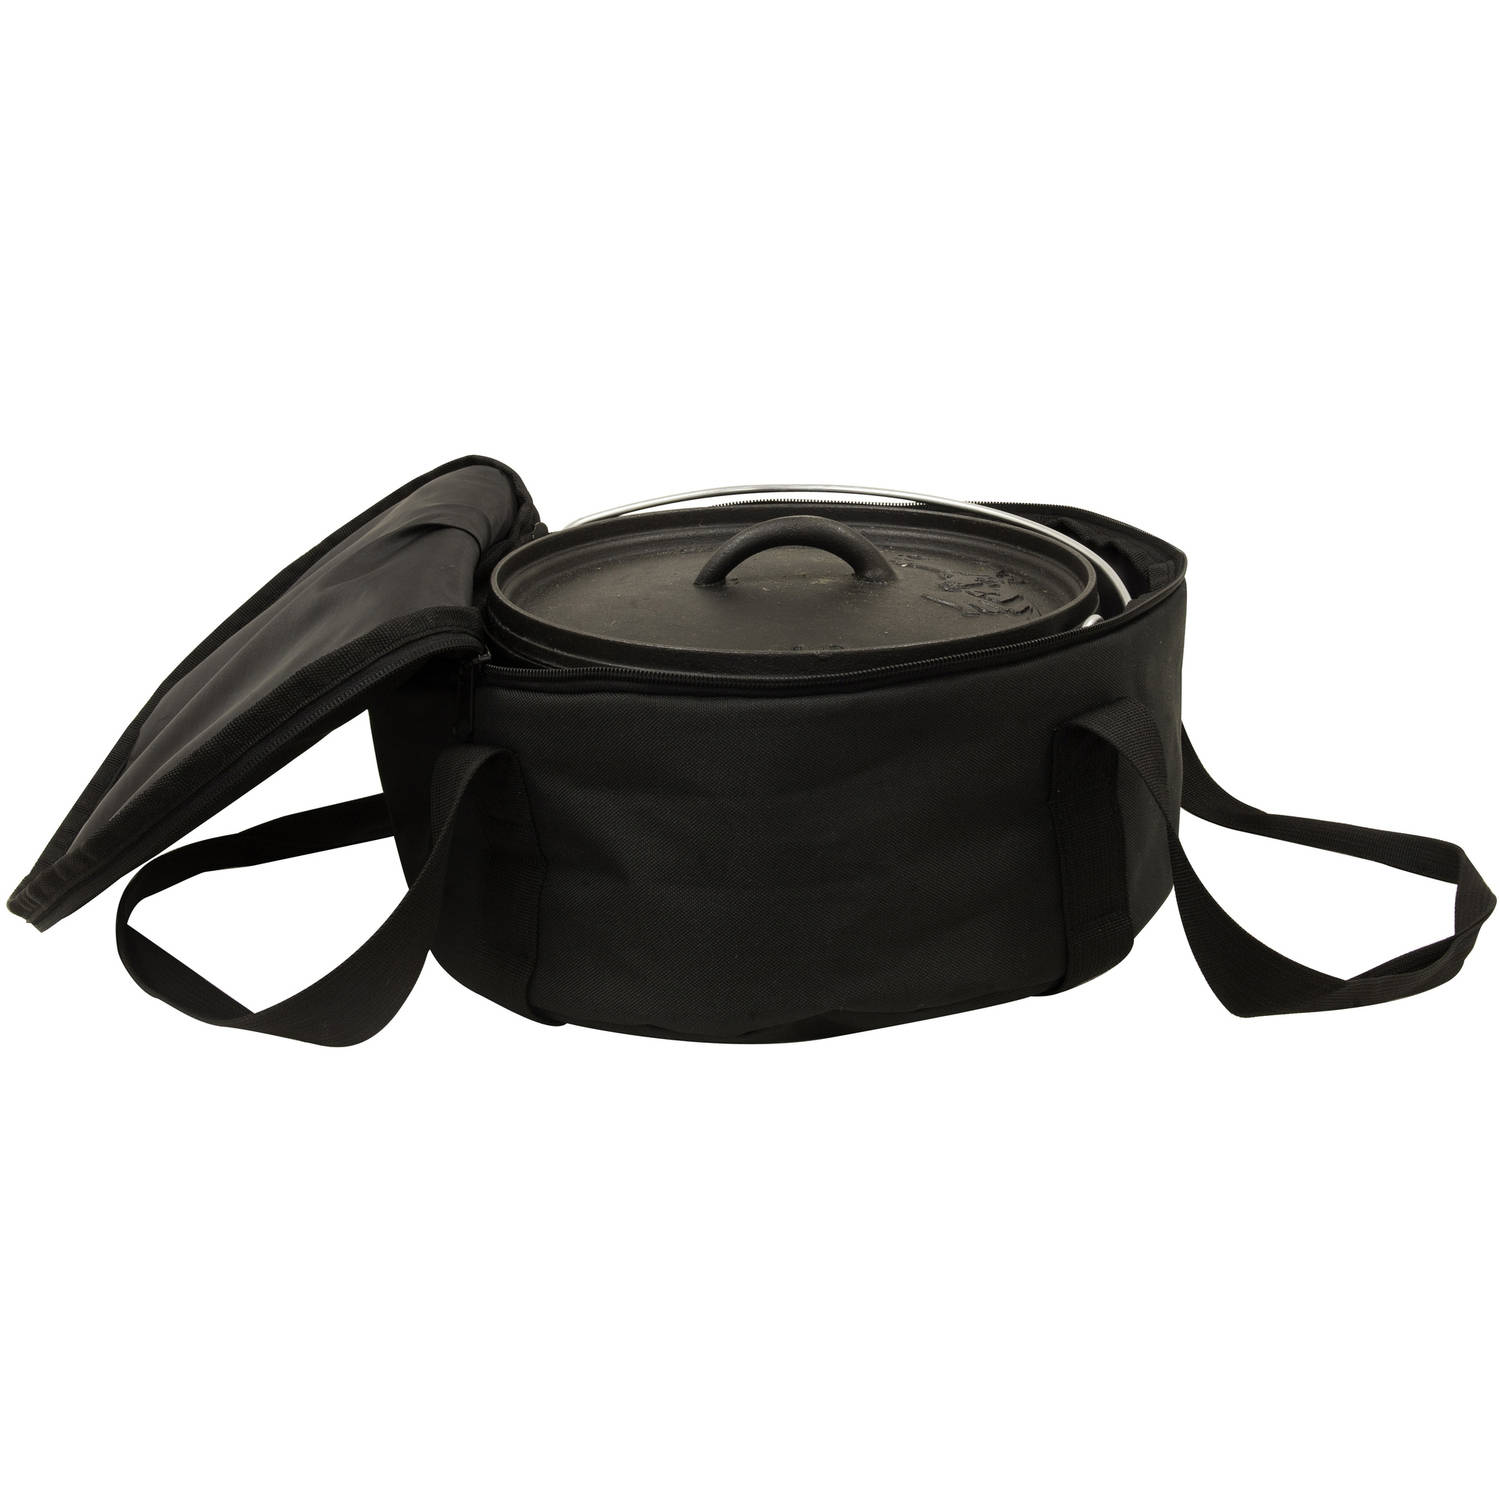 Camp Chef 14" Padded Dutch Oven Carry Bag, Tie Down Straps, CBDO14 - image 2 of 5